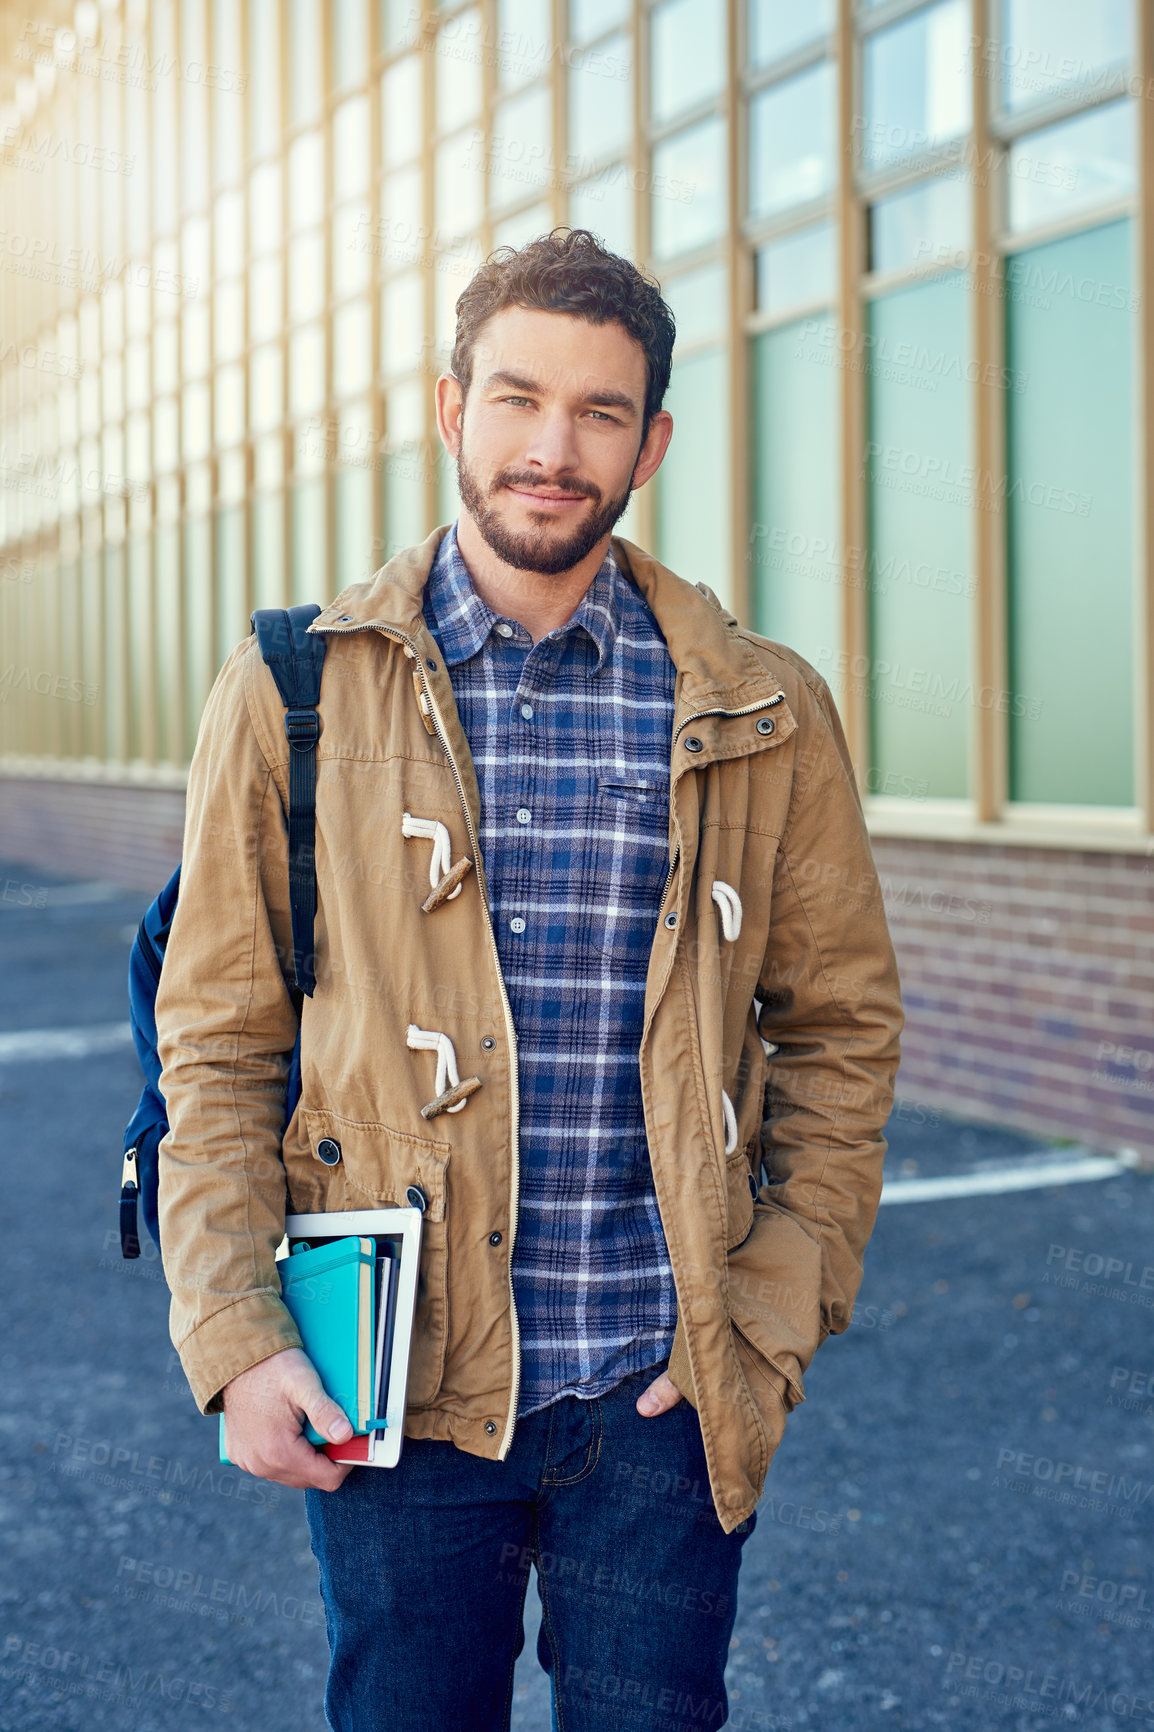 Buy stock photo Shot of a college student between classes on campus grounds